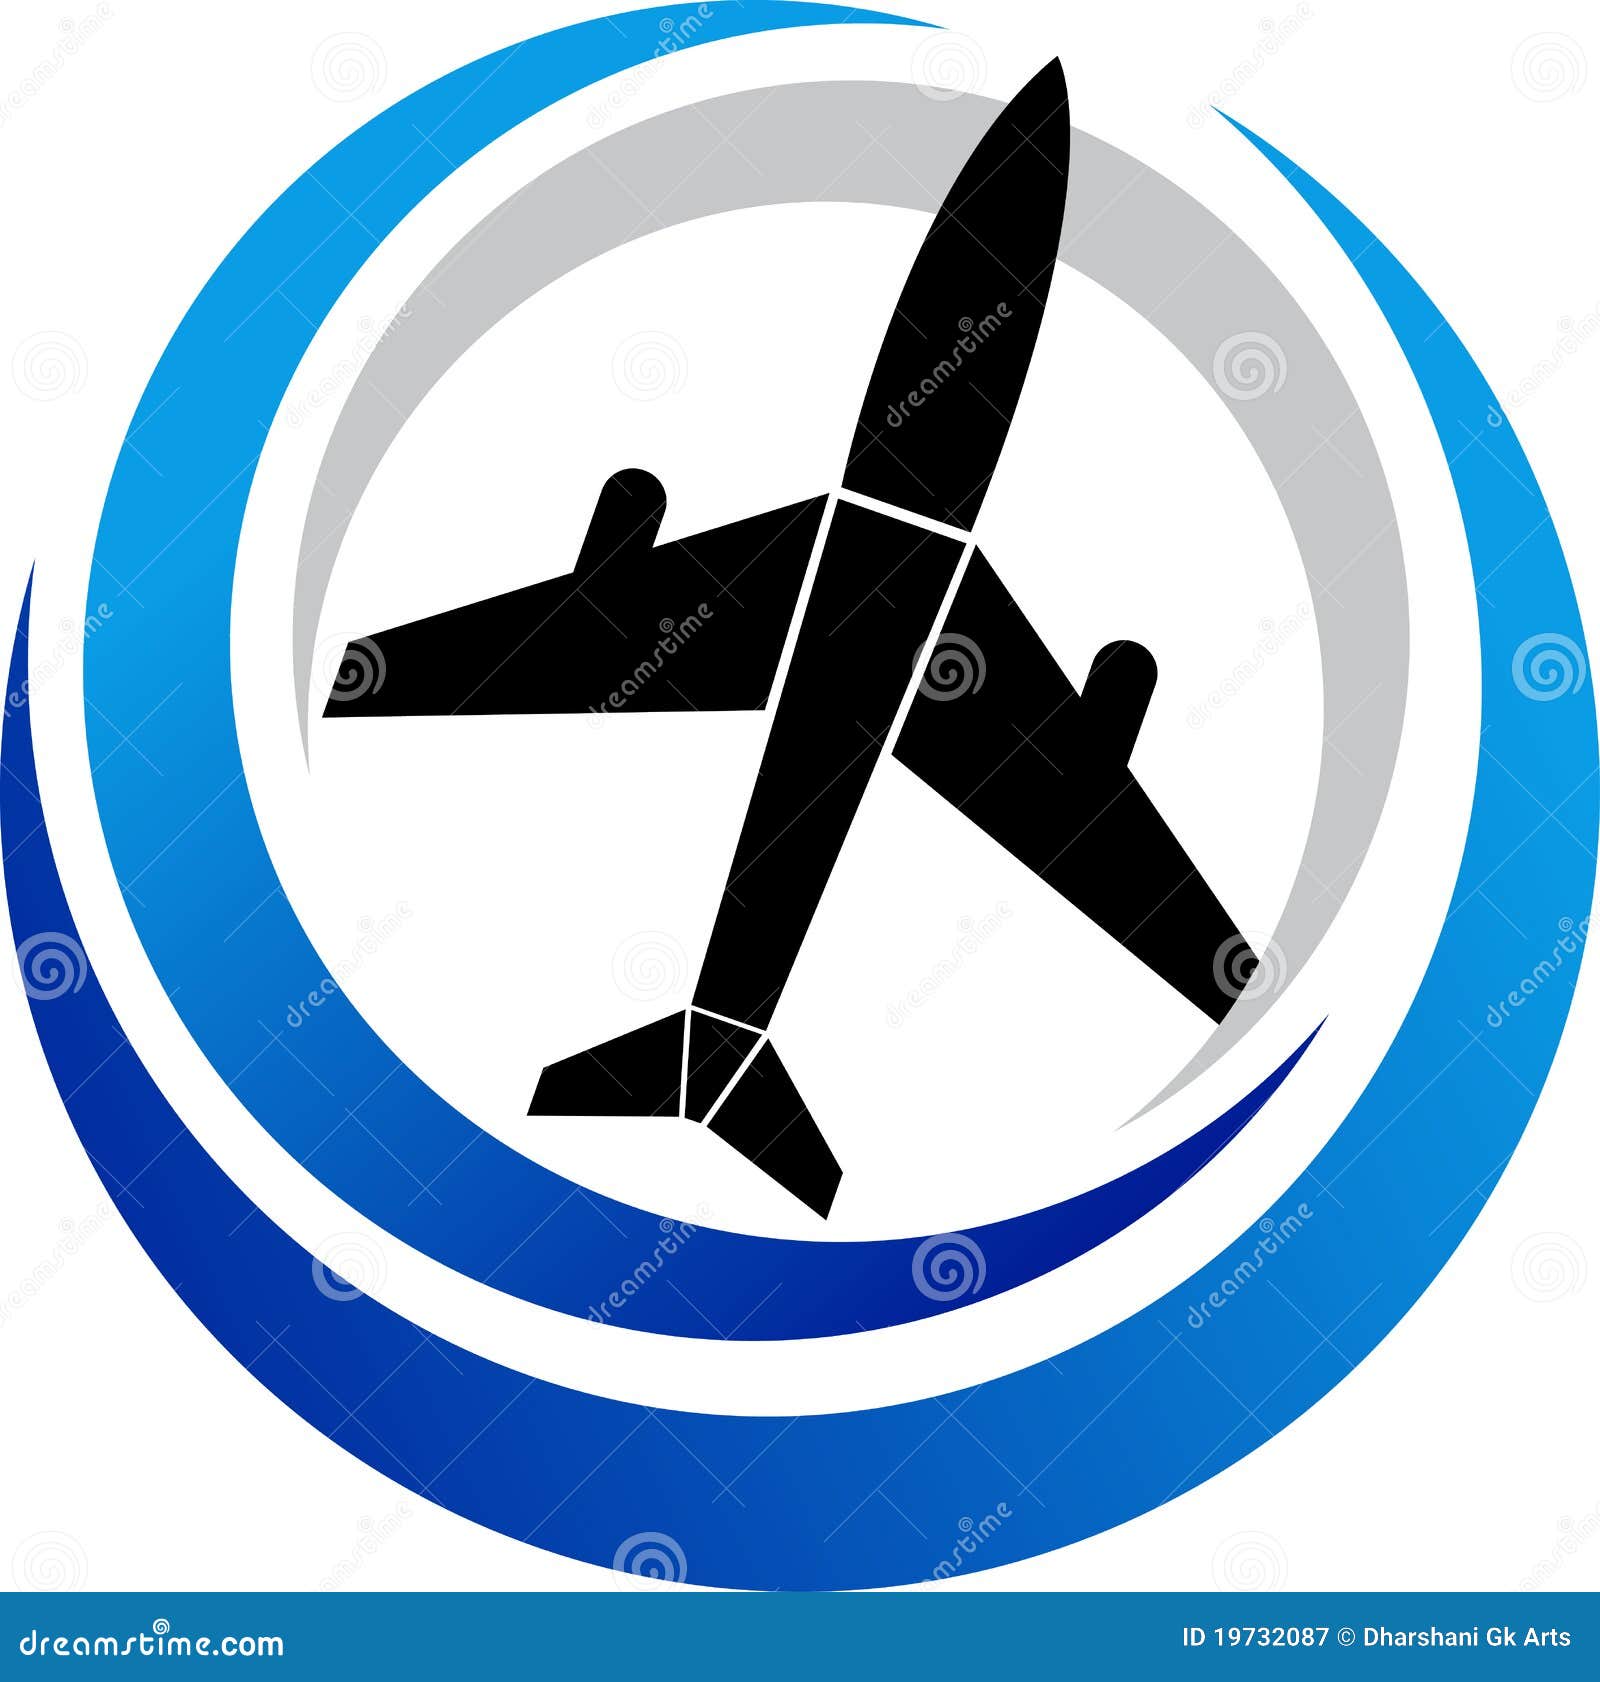 Plane Circle Maneuver Logo Icon Design Template Vector Graphic Template  Download on Pngtree | Circle logo design, Icon design, Travel agency logo